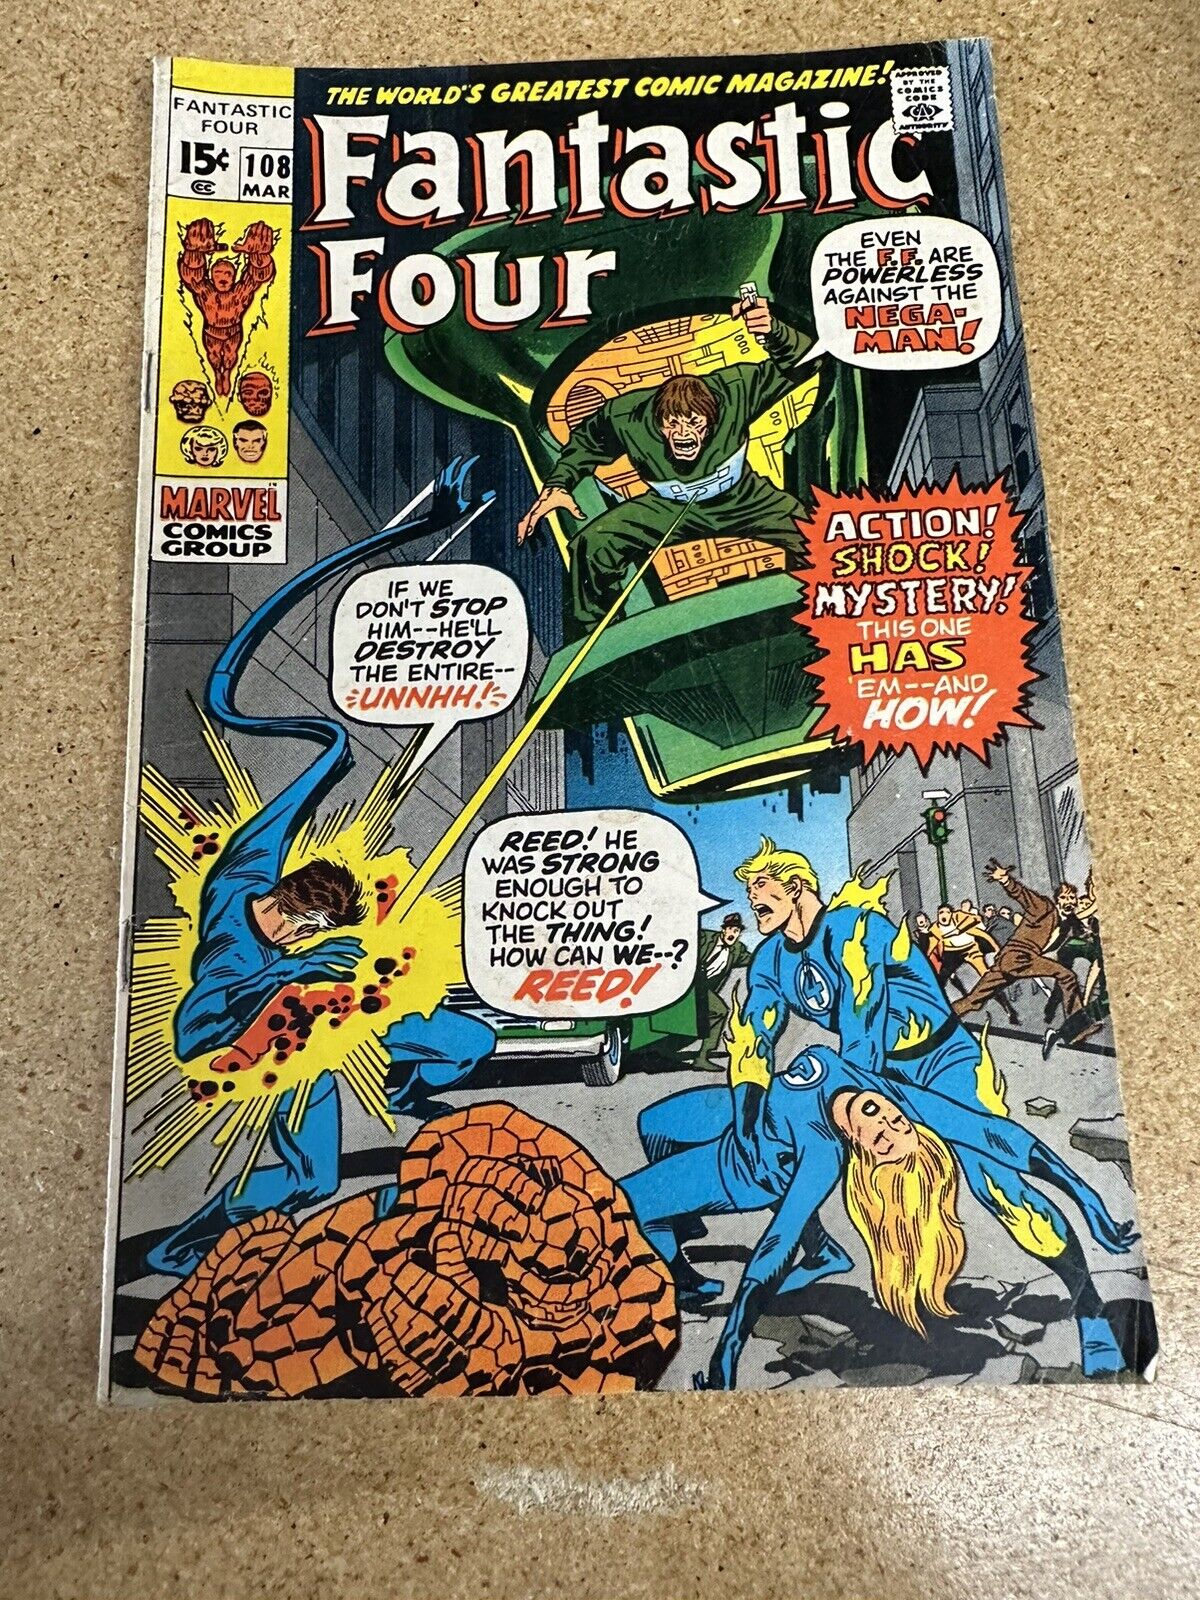 Fantastic Four #108 - Bronze Age - Final Issue with Jack Kirby as artist